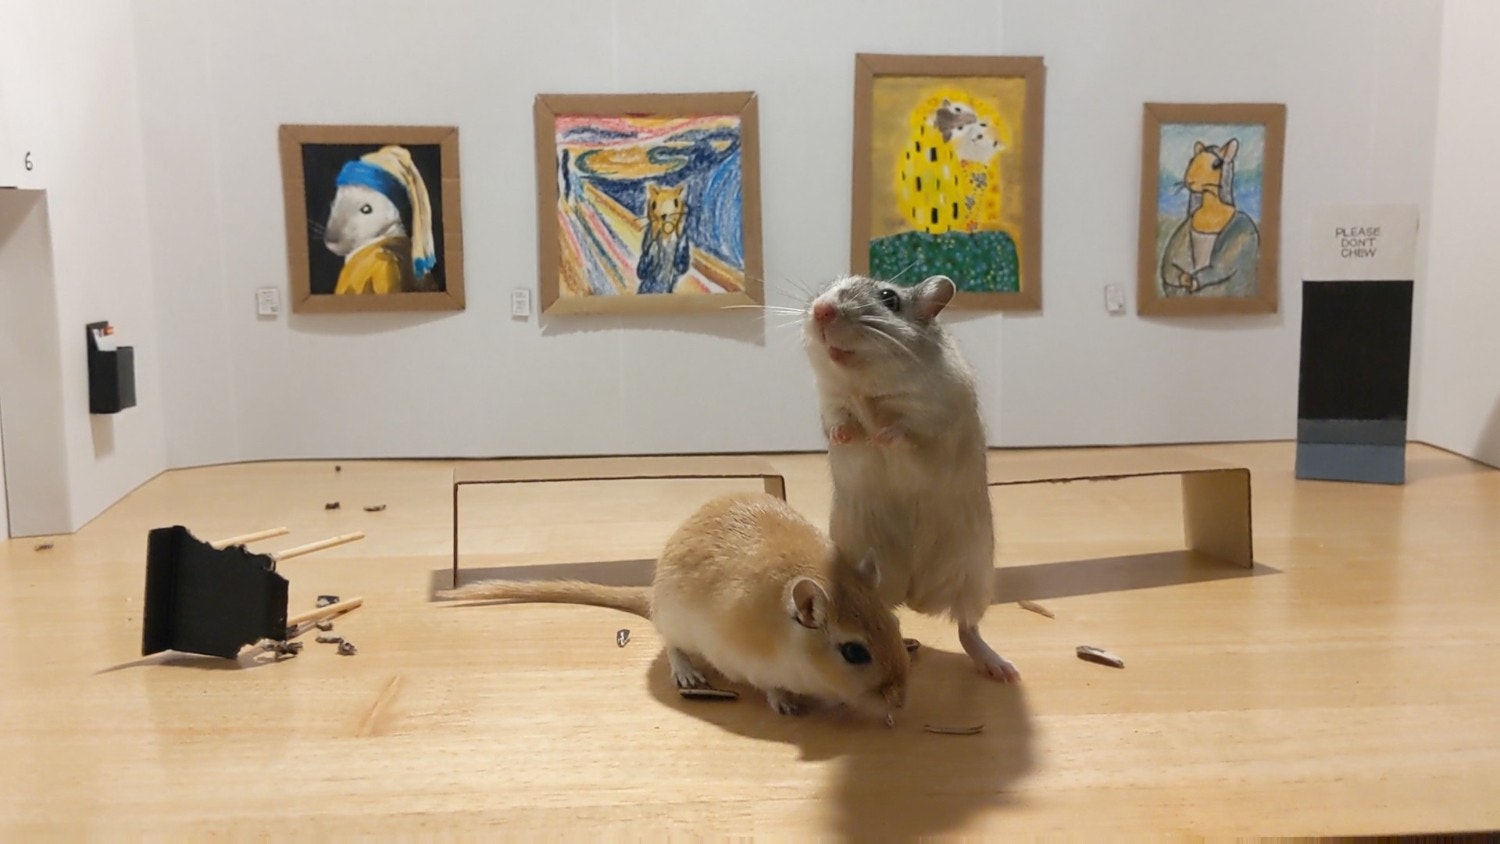 Two gerbils in front of cartoon artworks